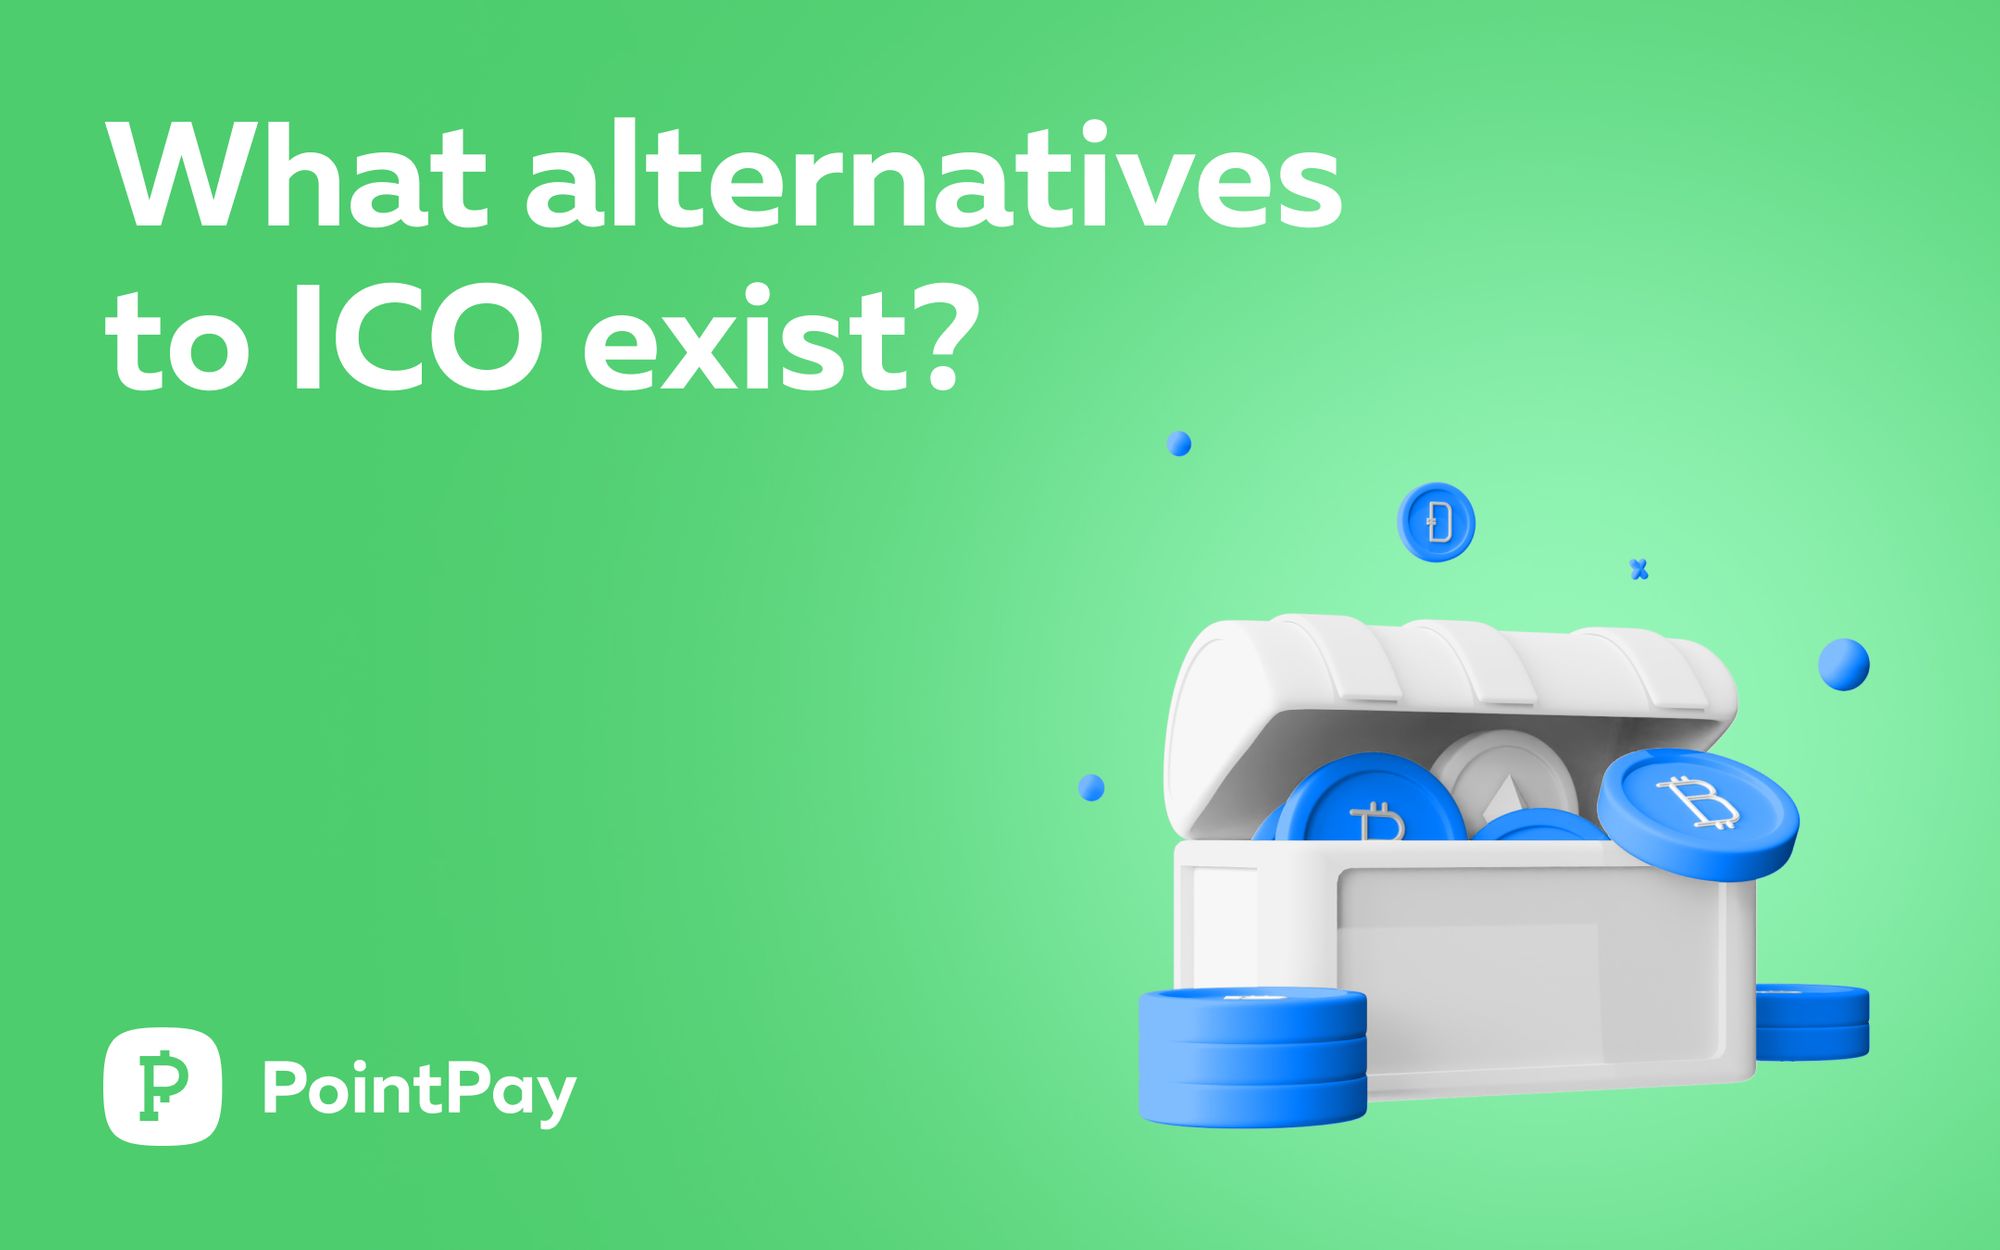 What are the alternatives to ICO?